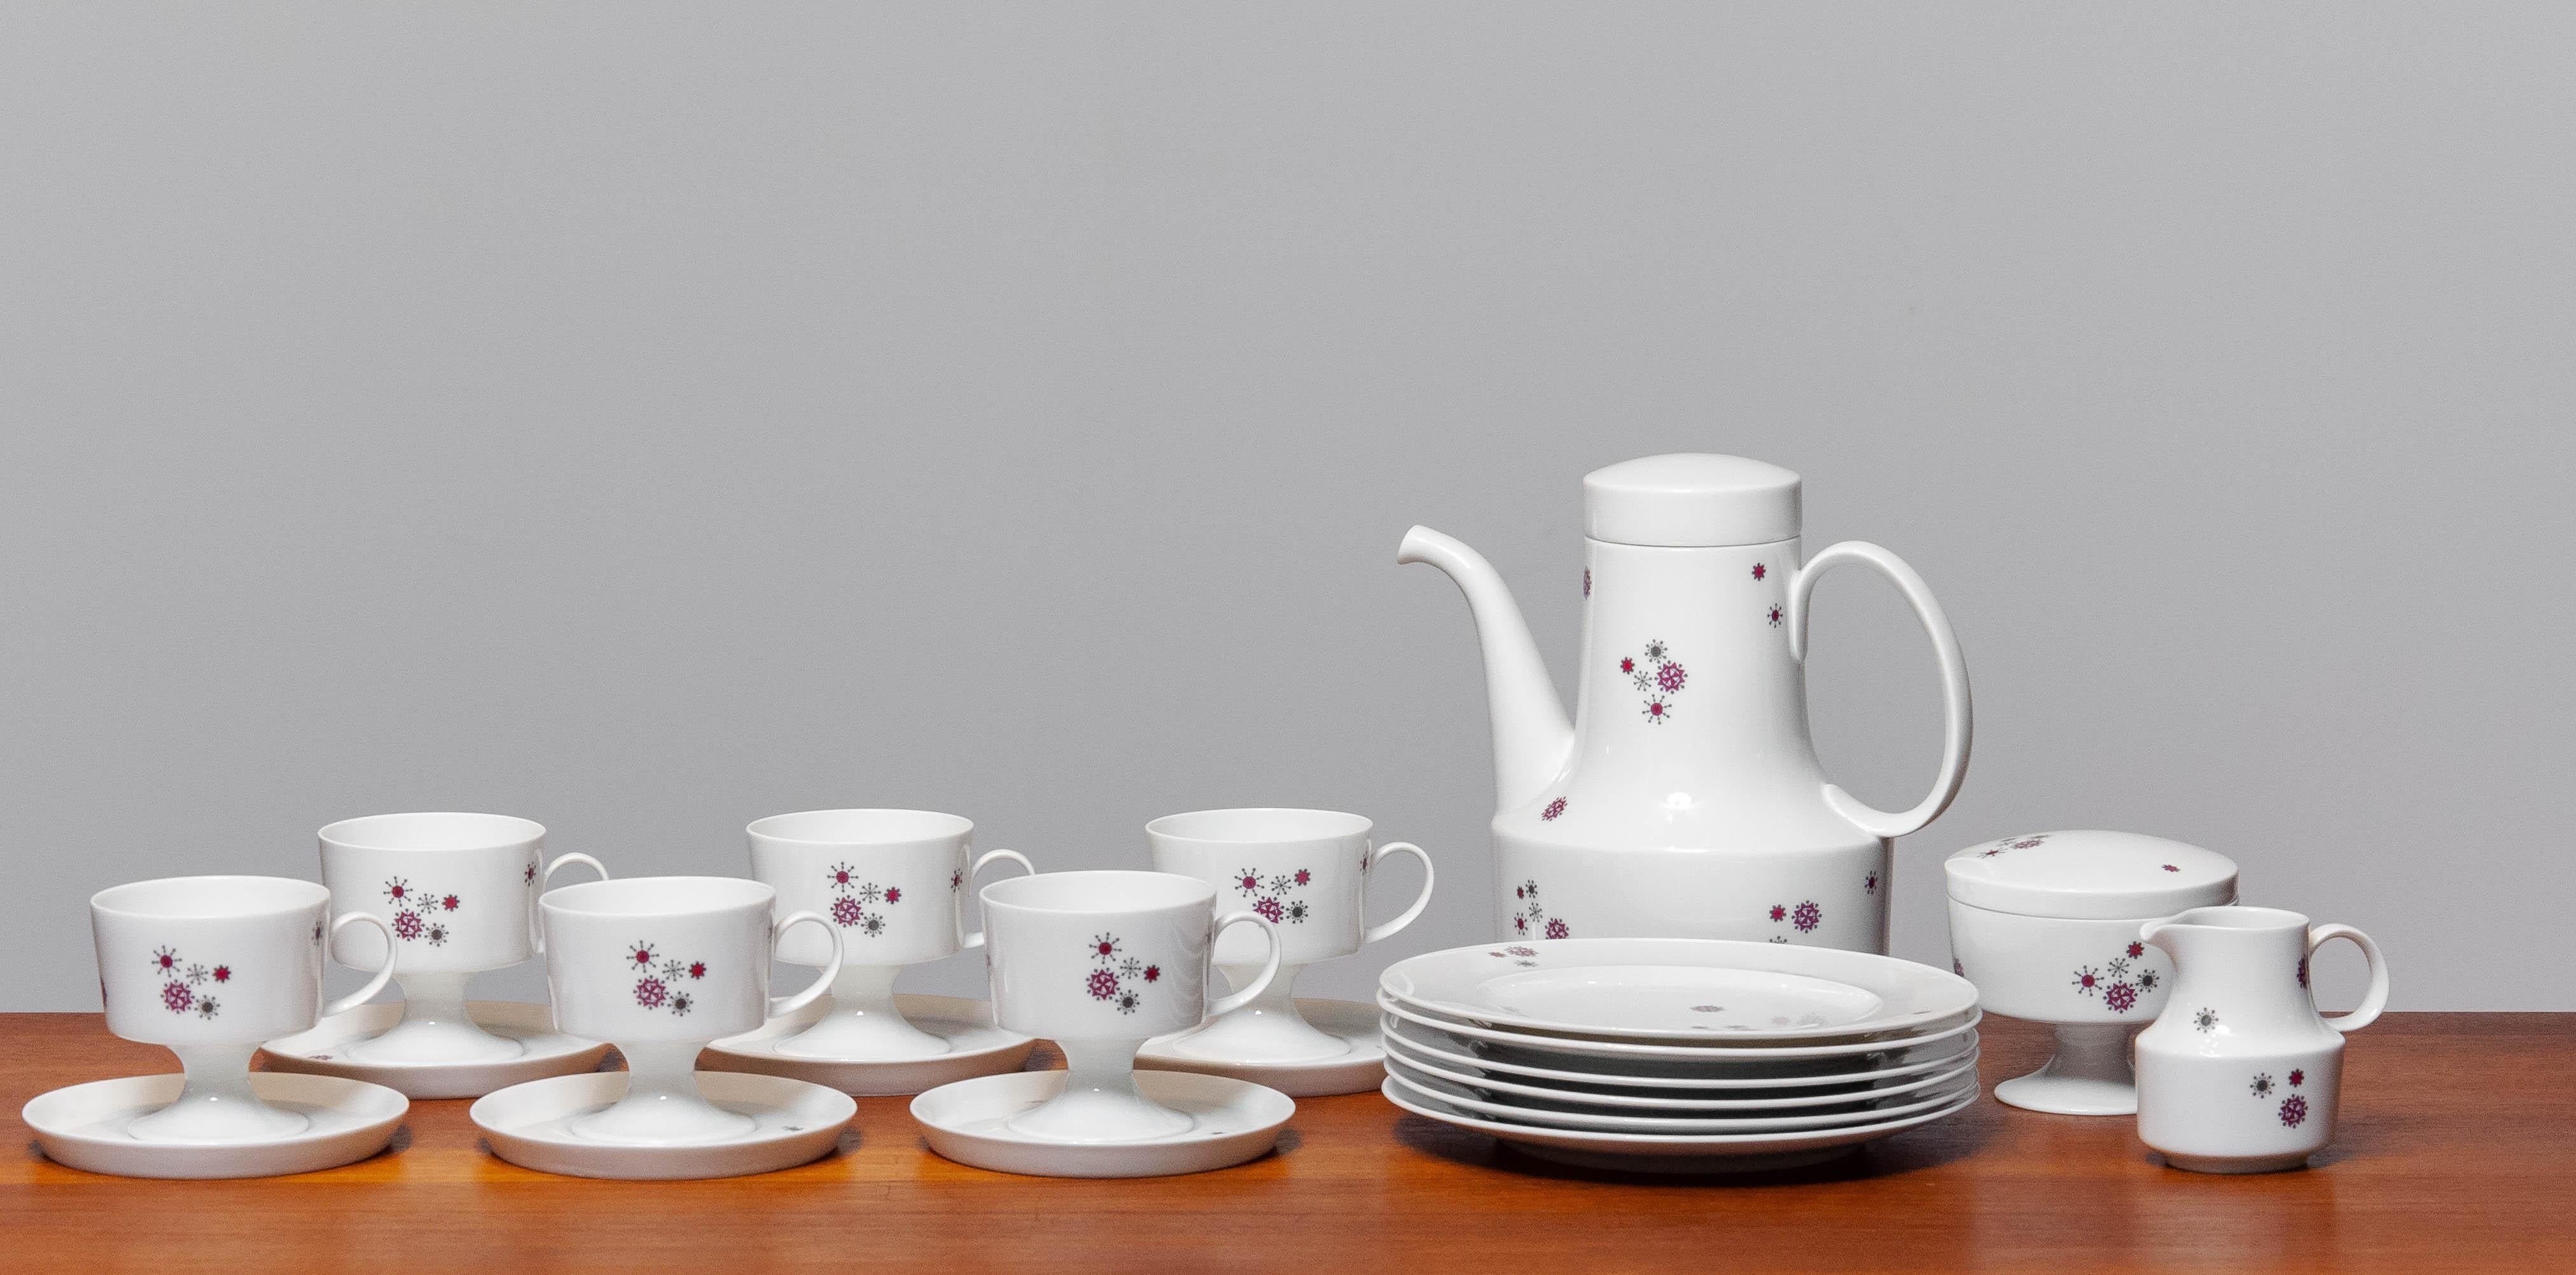 Beautiful porcelain tea / coffee set from the 'Composition' series and decorated with the 'Granat' decor designed by Tapio Wirkkala and Ute Schröder for Rosenthal in Germany.
Model: 1350
This tea / coffee set is made complet for six persons and in